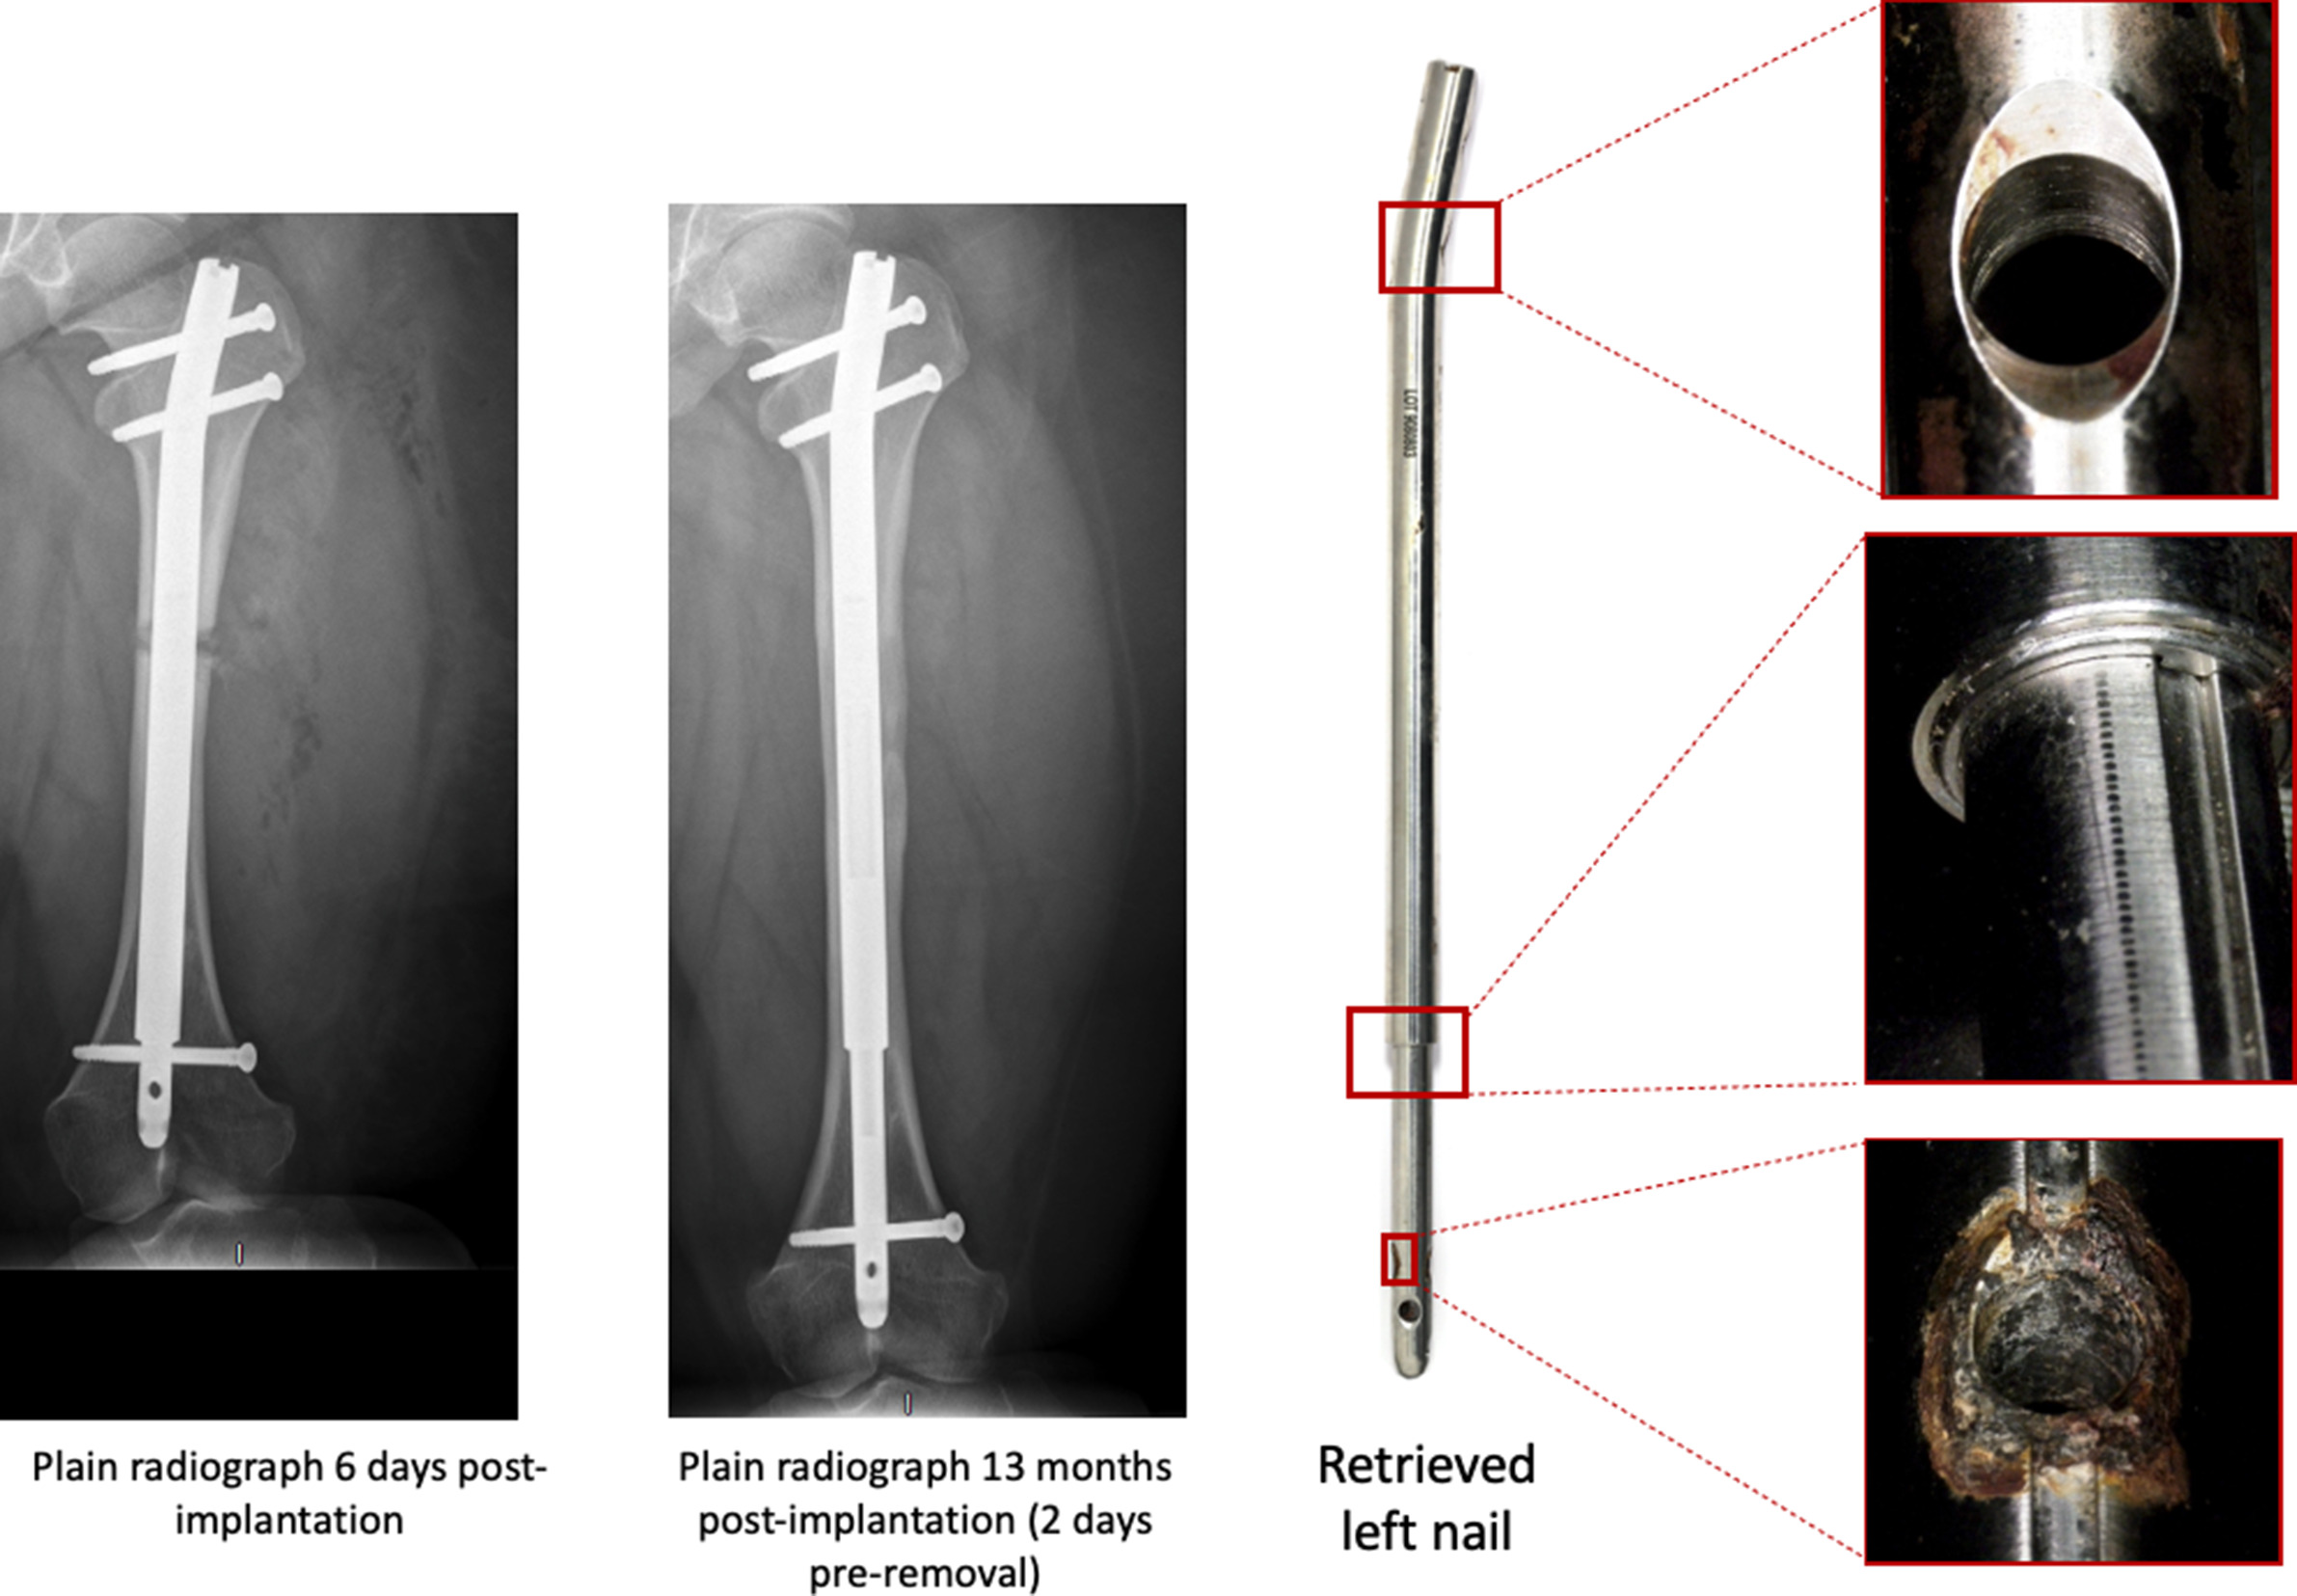 Fig. 11 
            Images showing immediate postimplantation and preremoval plain radiographs of Patient 2 implanted with a left femoral nail, removed after 13 months. The cortical thickening observed around the right nail junction is not observed here. Retrieval analysis found no evidence of corrosion at the extendable junction of this left nail. However, there was severe corrosion within one of the distal nail-screw junctions.
          